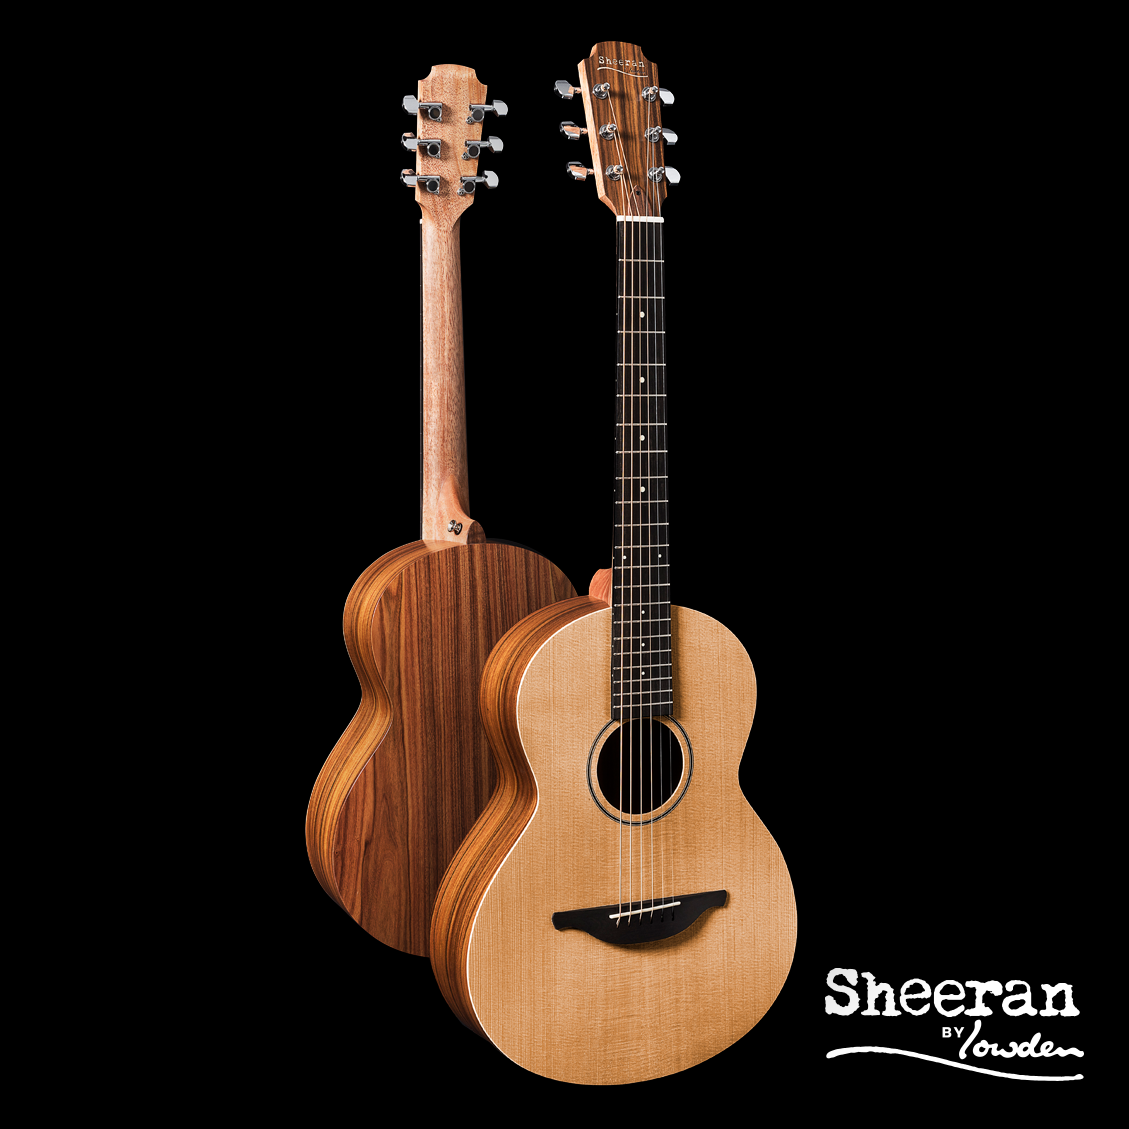 Sheeran by Lowden W03 Solid Cedar Top, Santos Rosewood back and sides, Body Bevel, LR Bags Element pickup